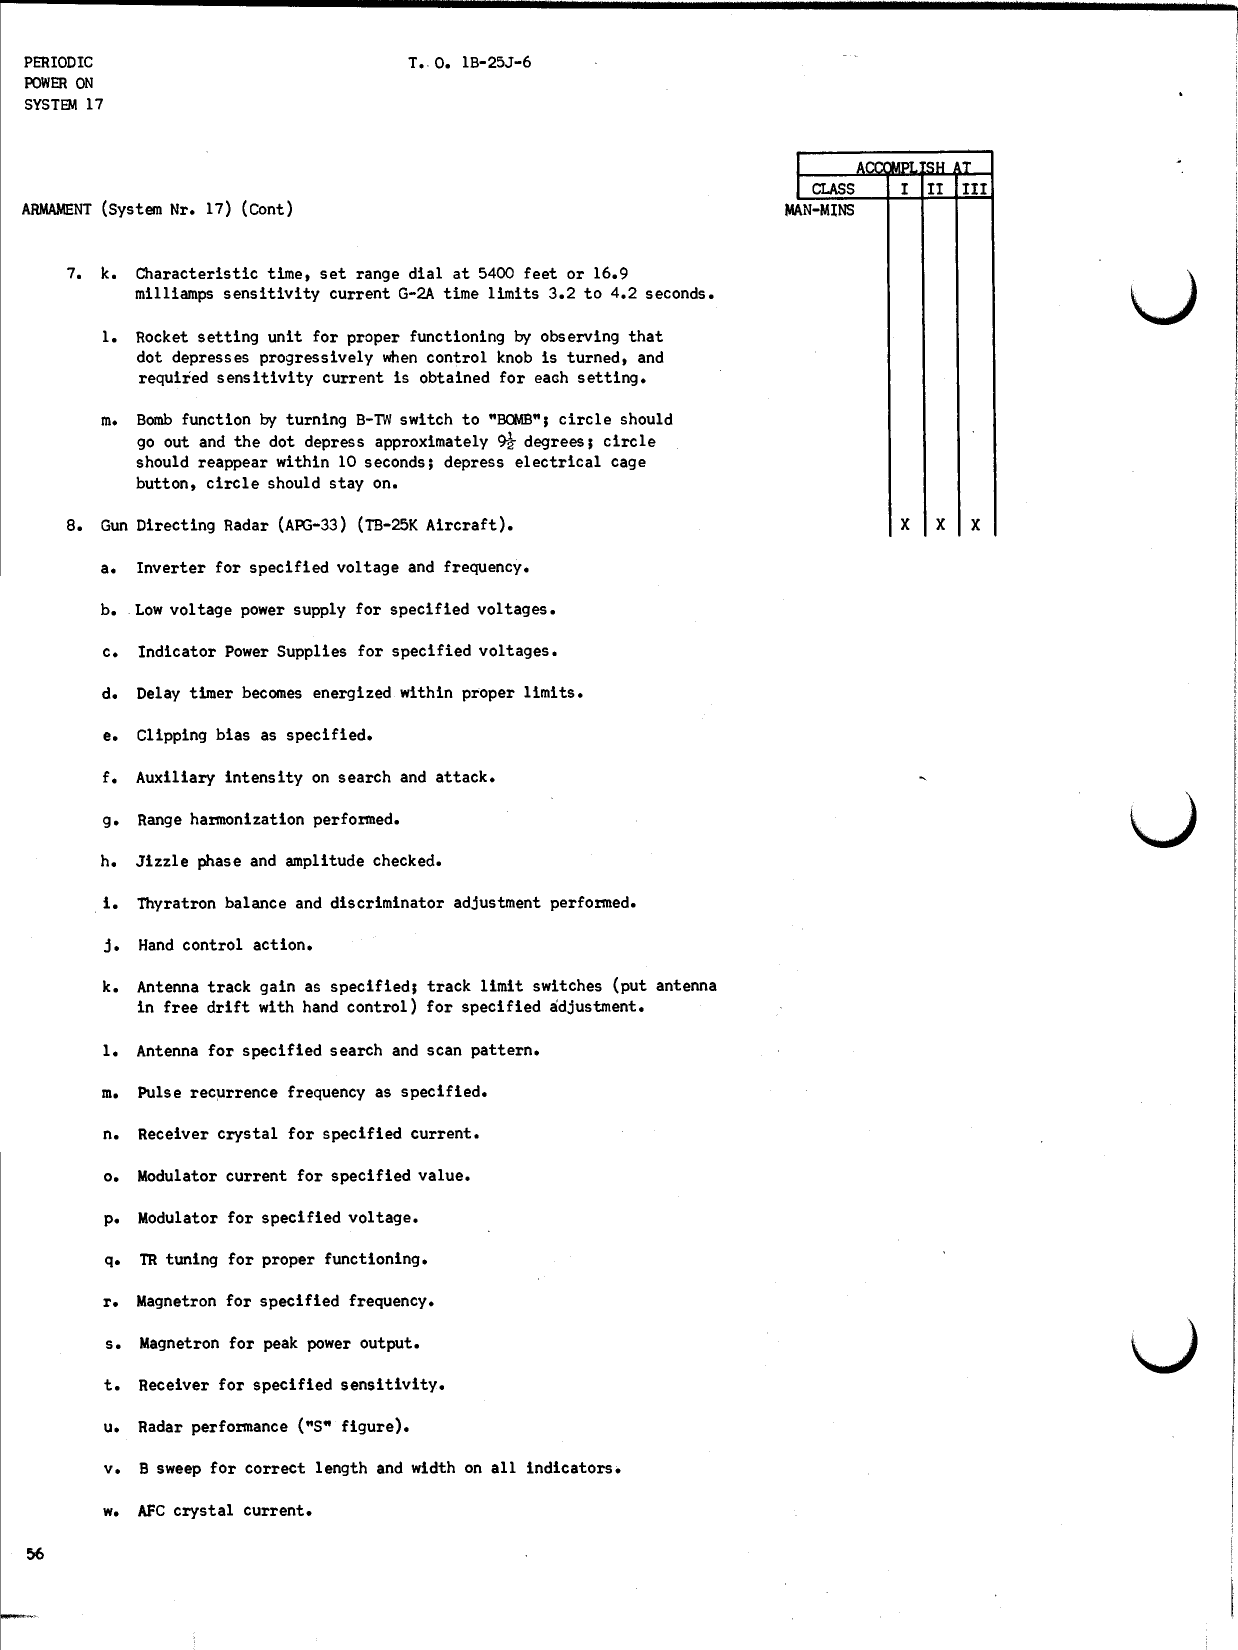 Sample page 60 from AirCorps Library document: Handbook Inspection Requirements - B-25